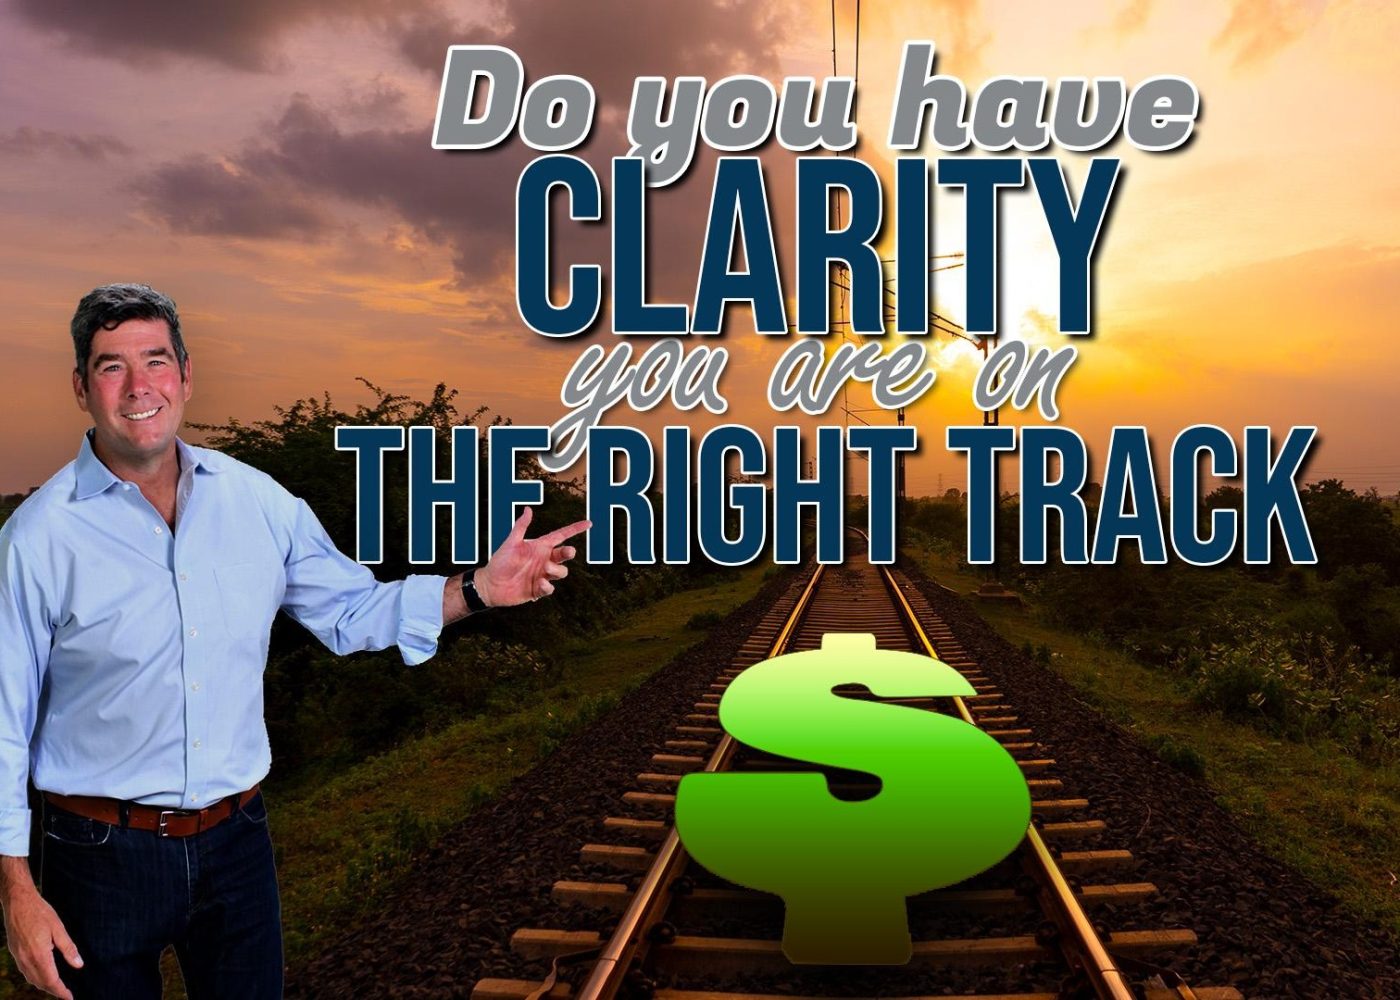 Video: Do You Have Clarity That You Are on the Right Track?